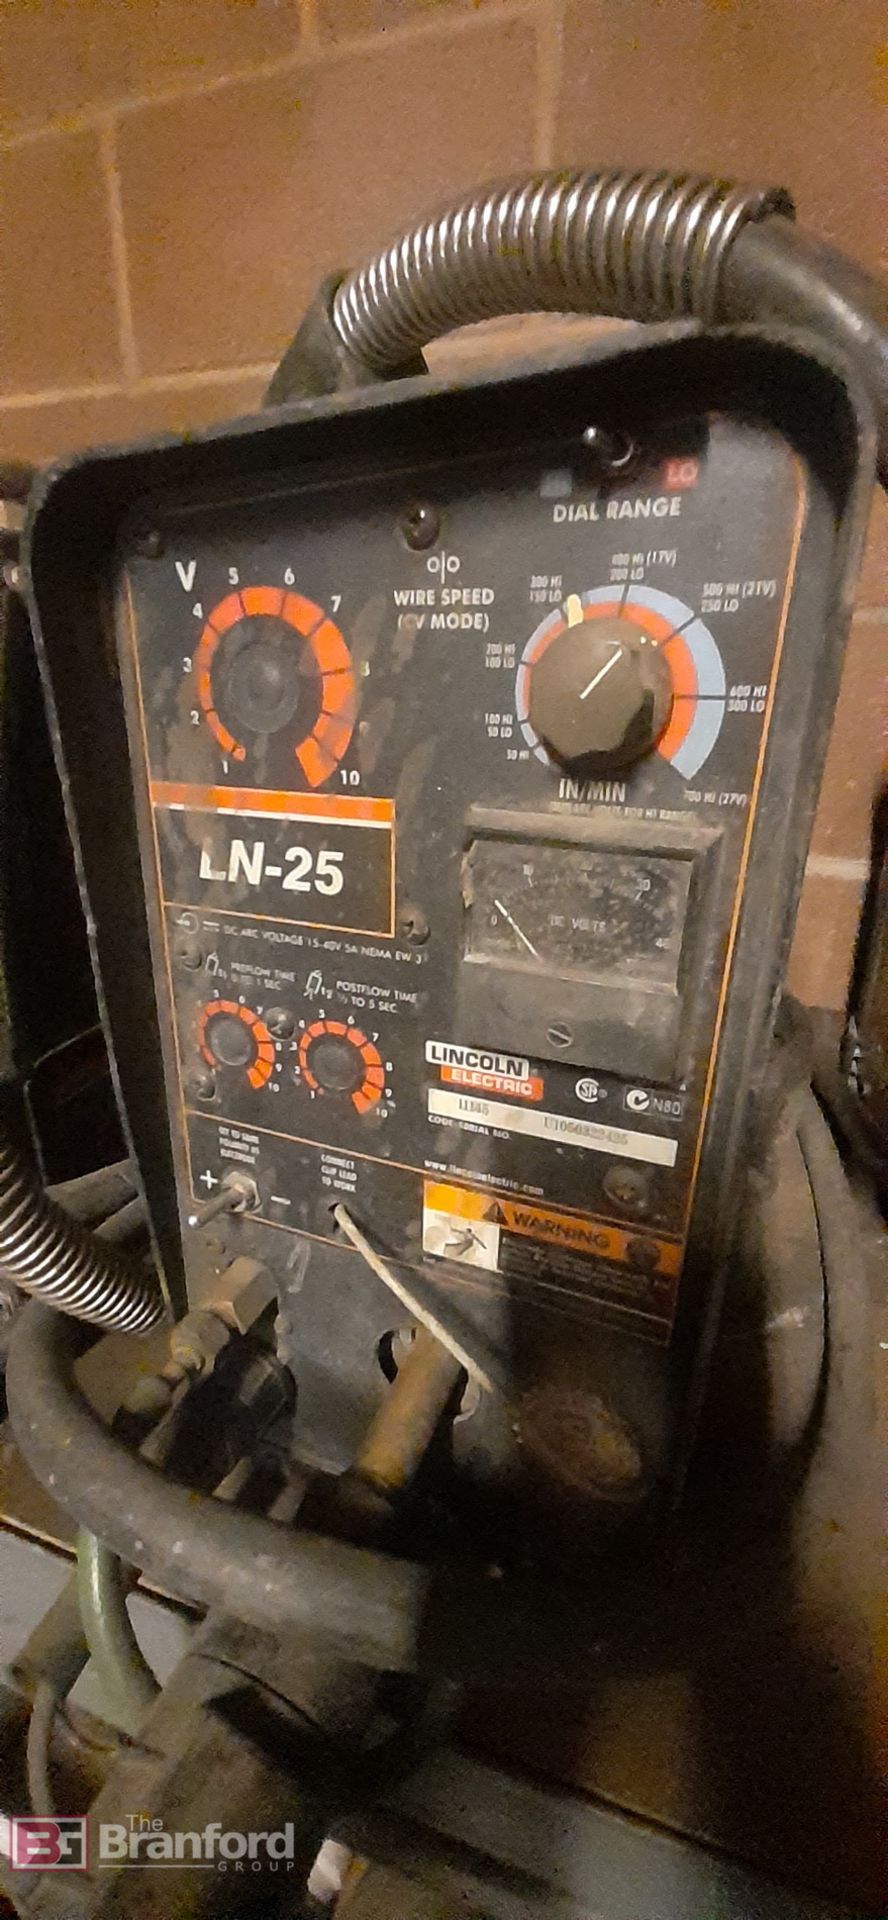 Lincoln Electric Model LN-25, Hand Carry Welding System - Image 2 of 4